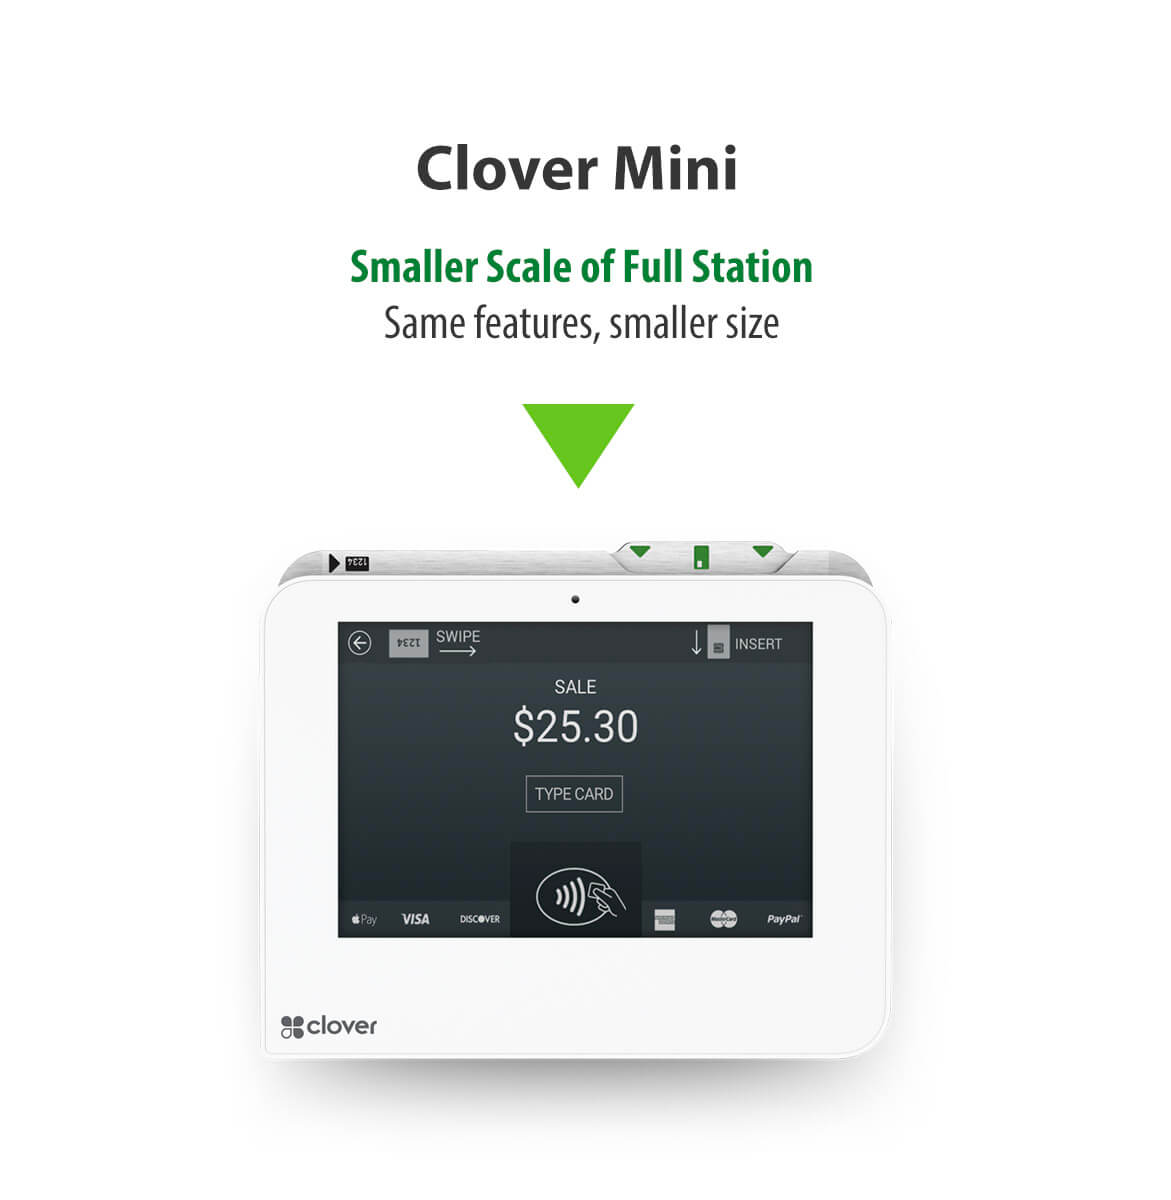 Clover Mini smaller scale of the full station same features, smaller size